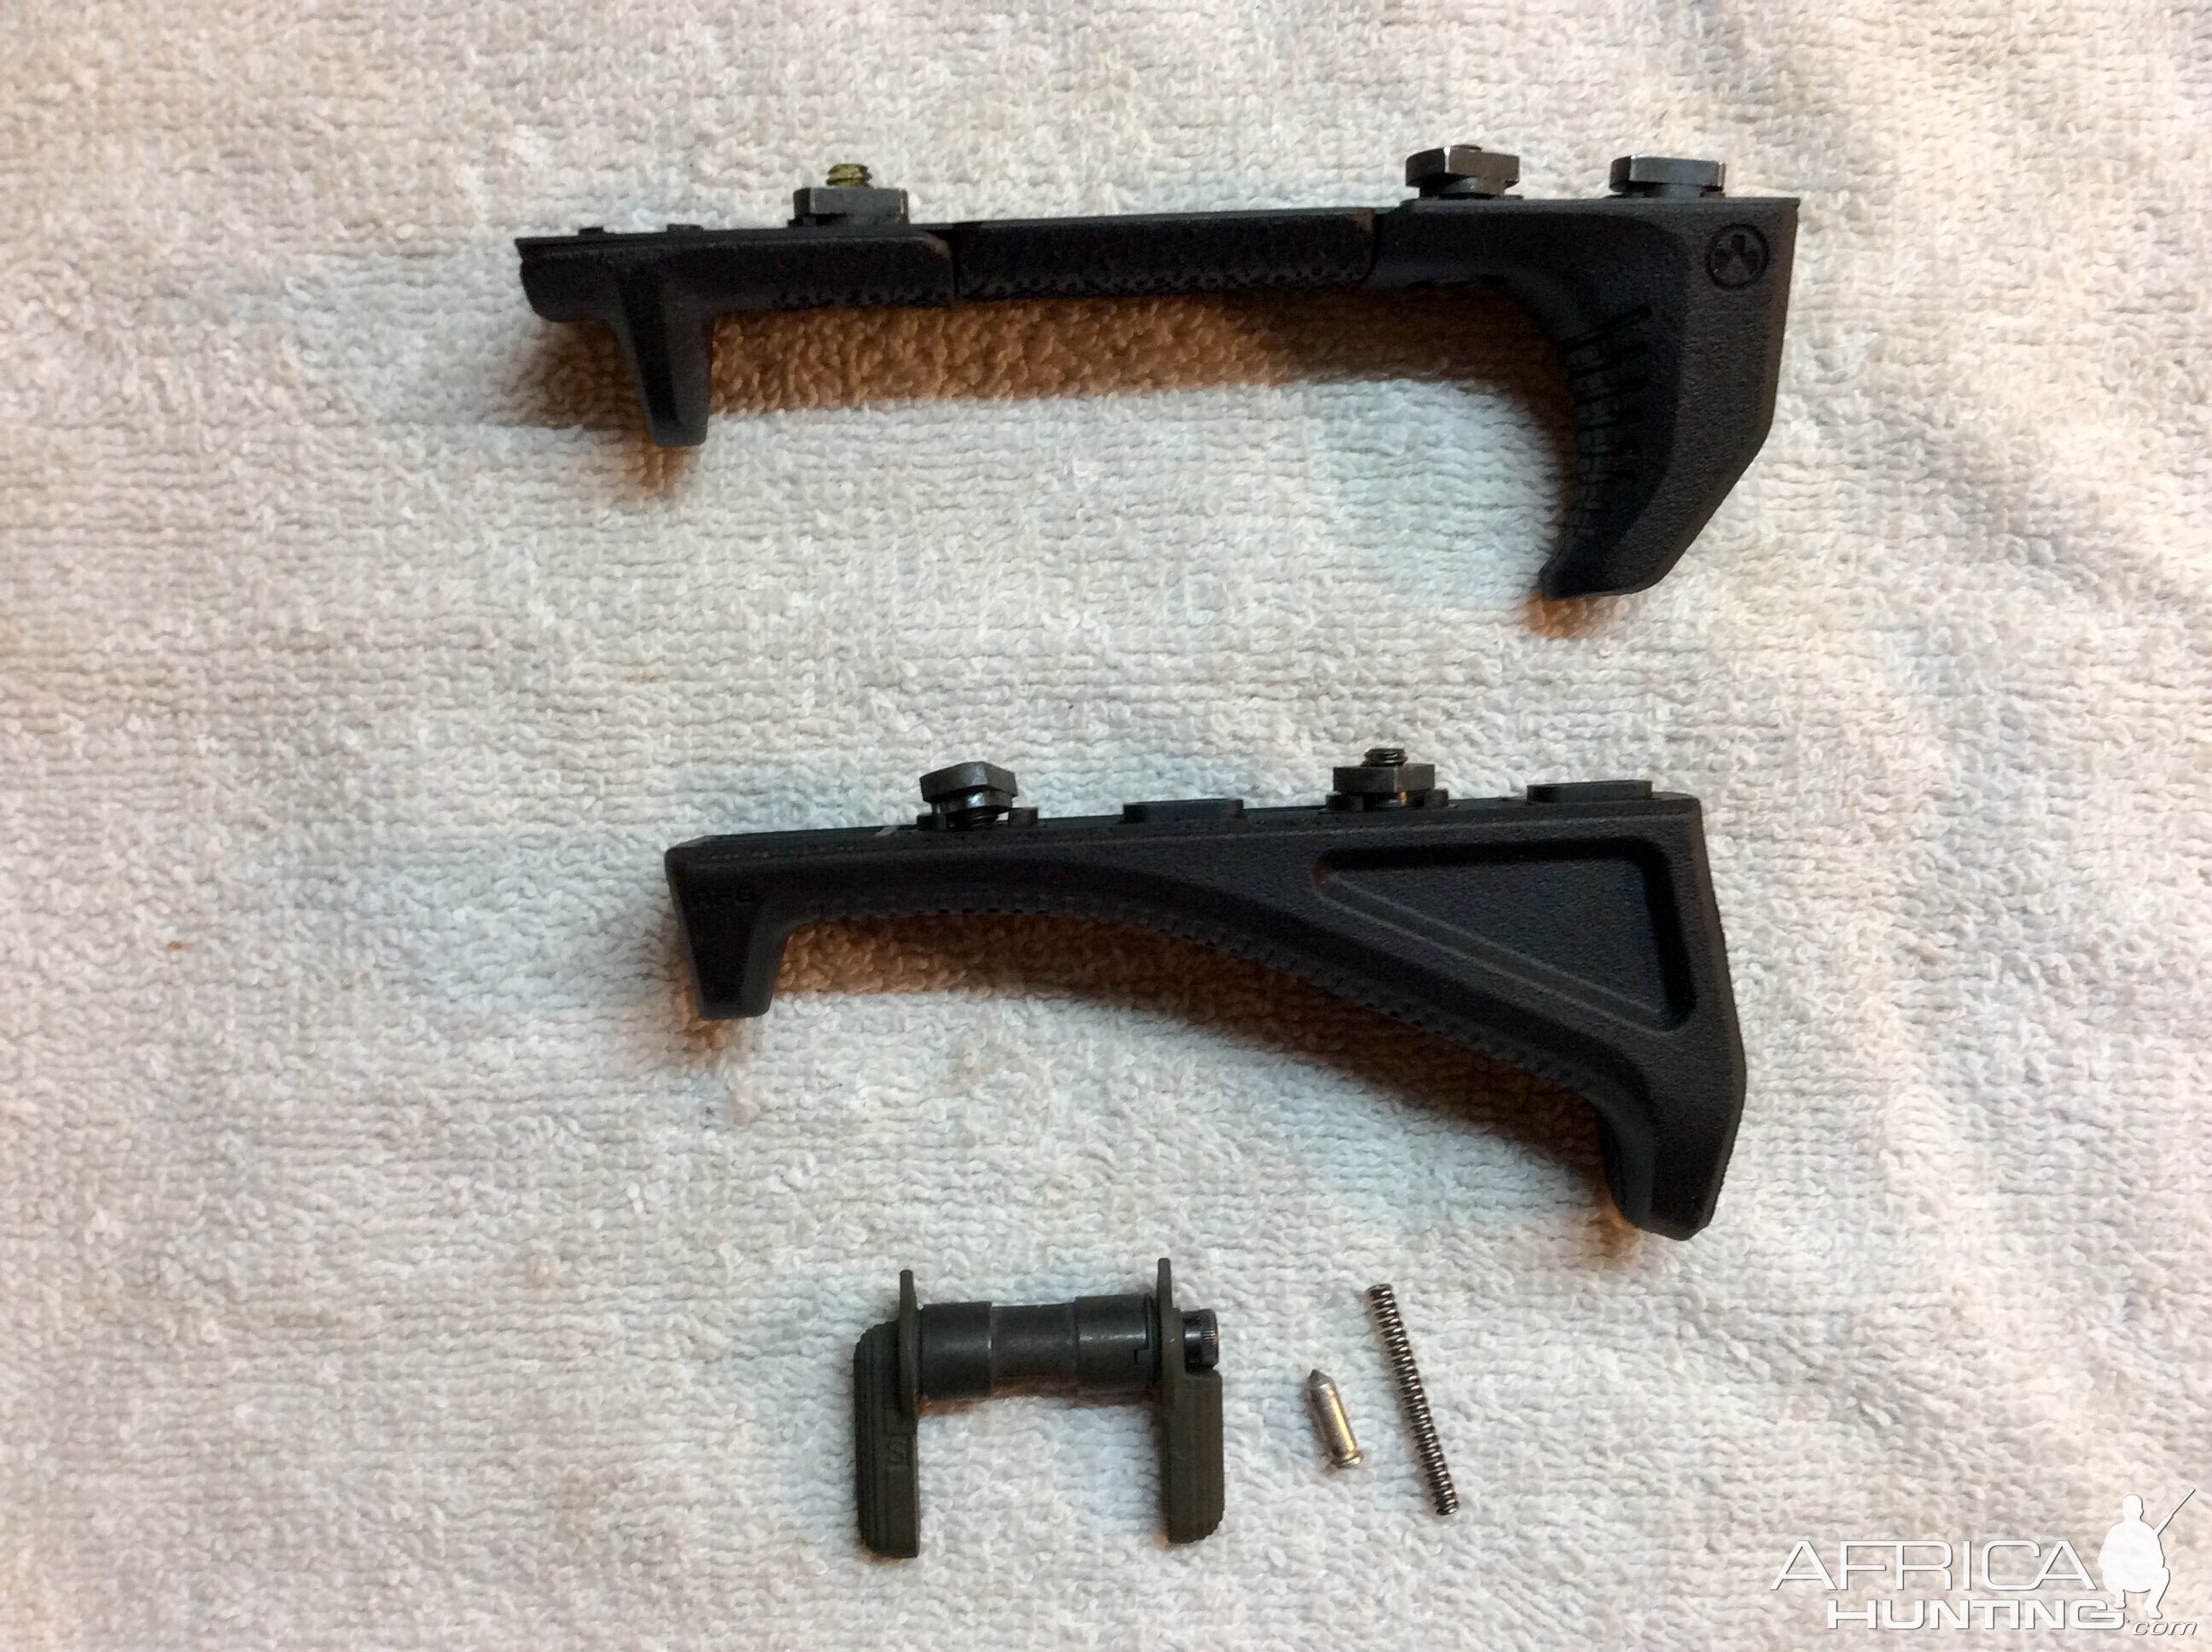 Magpul m-loc forend grips